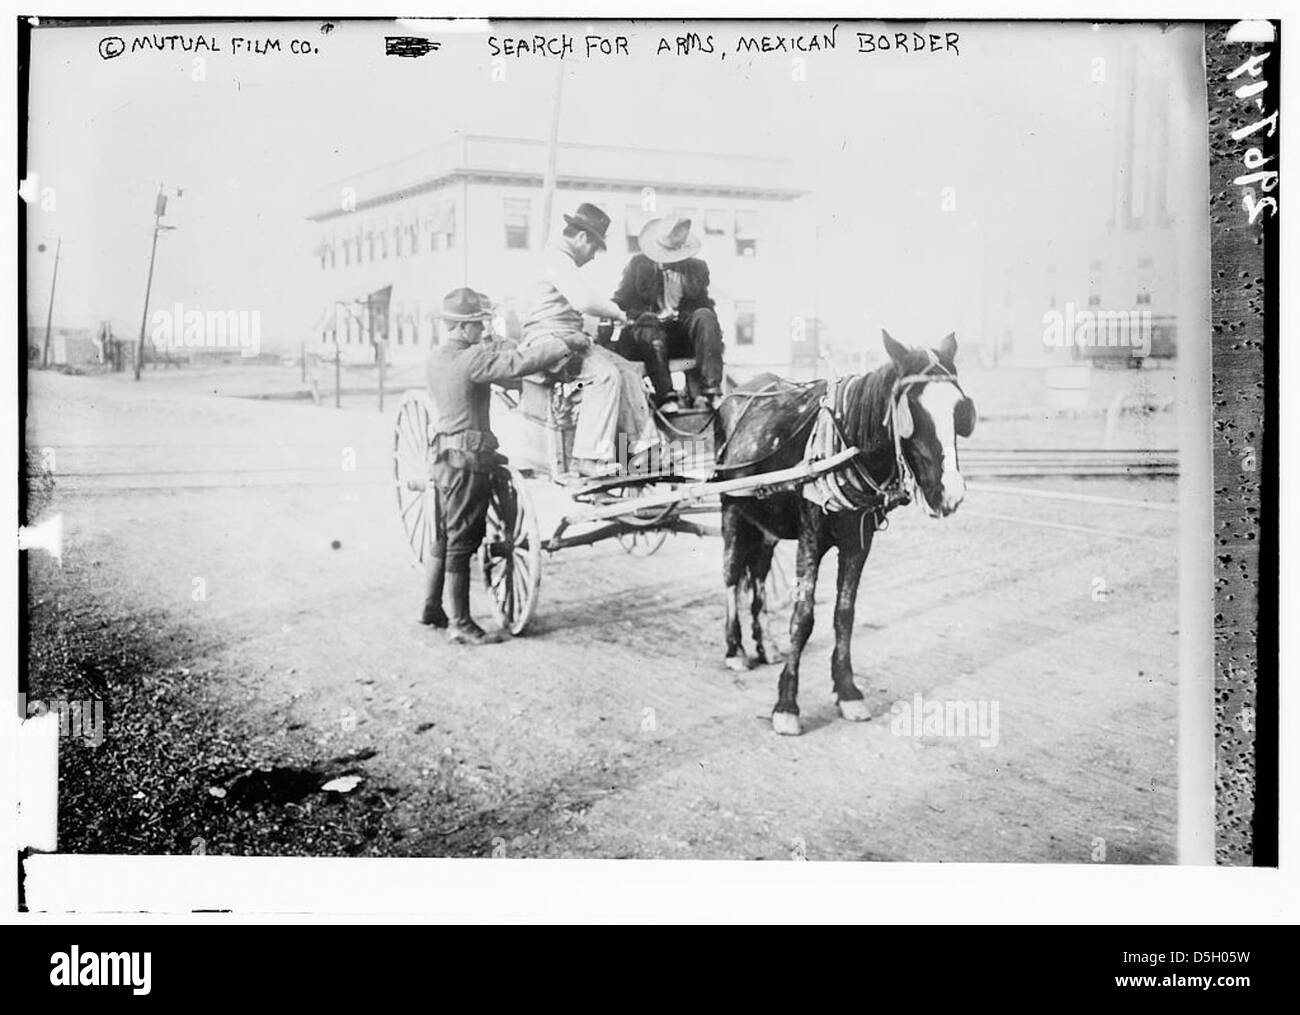 Search for arms - Mexican border (LOC) Stock Photo